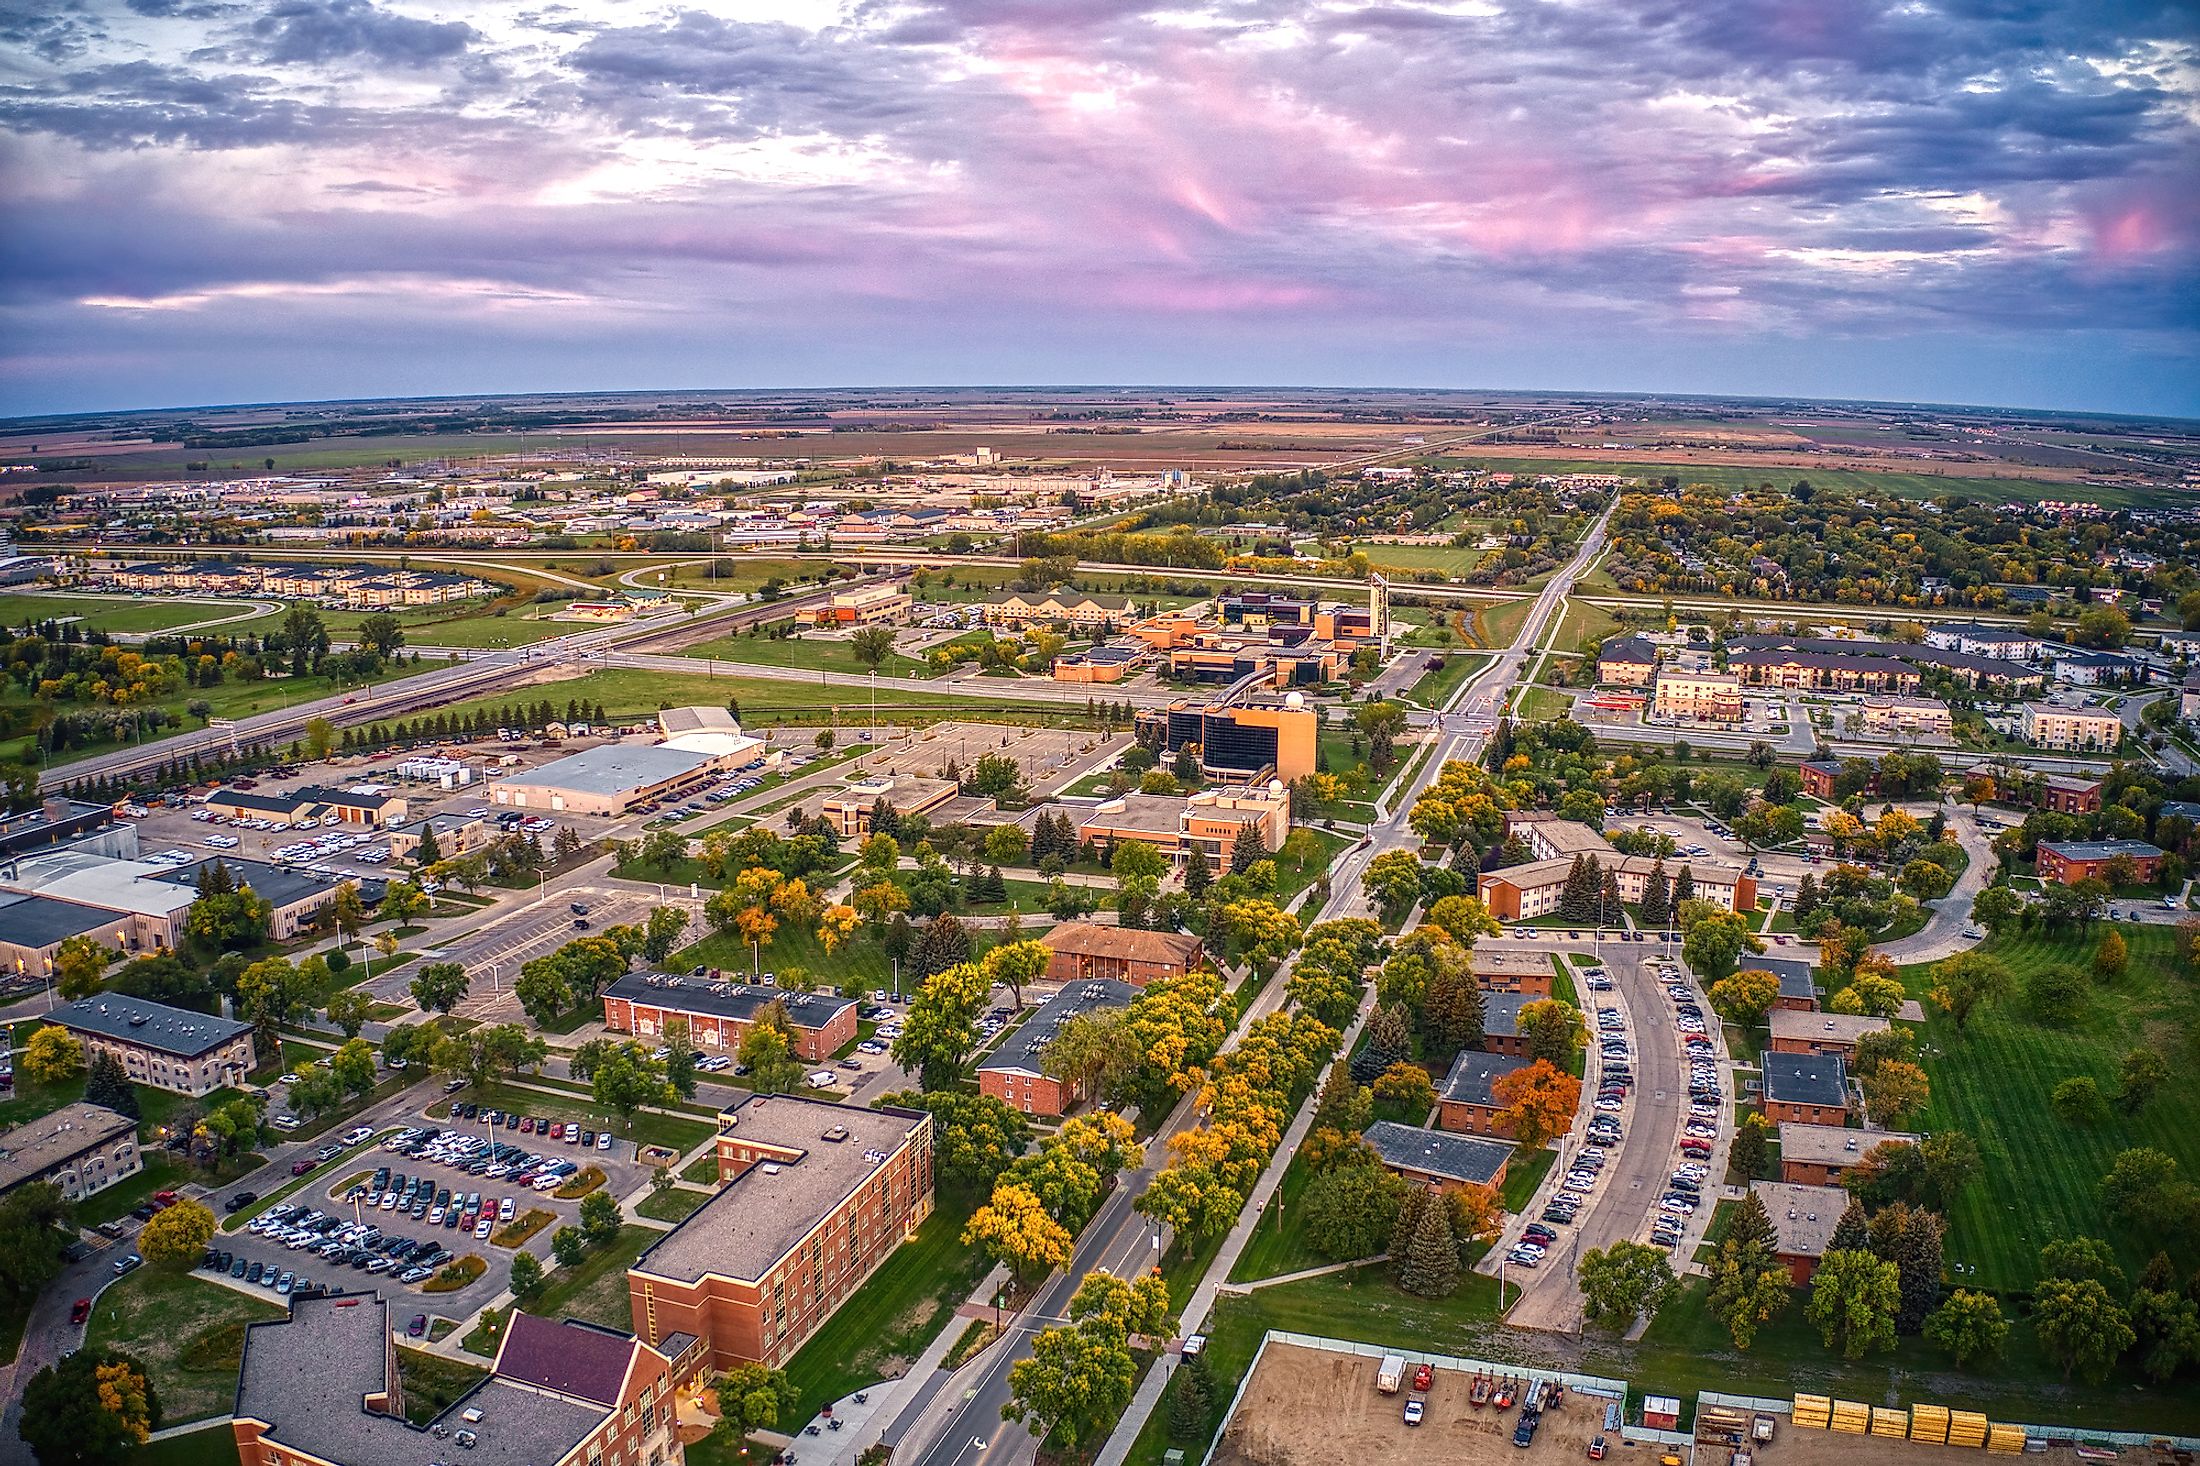 Aerial view of the college town of Grand Forks, North Dakota.